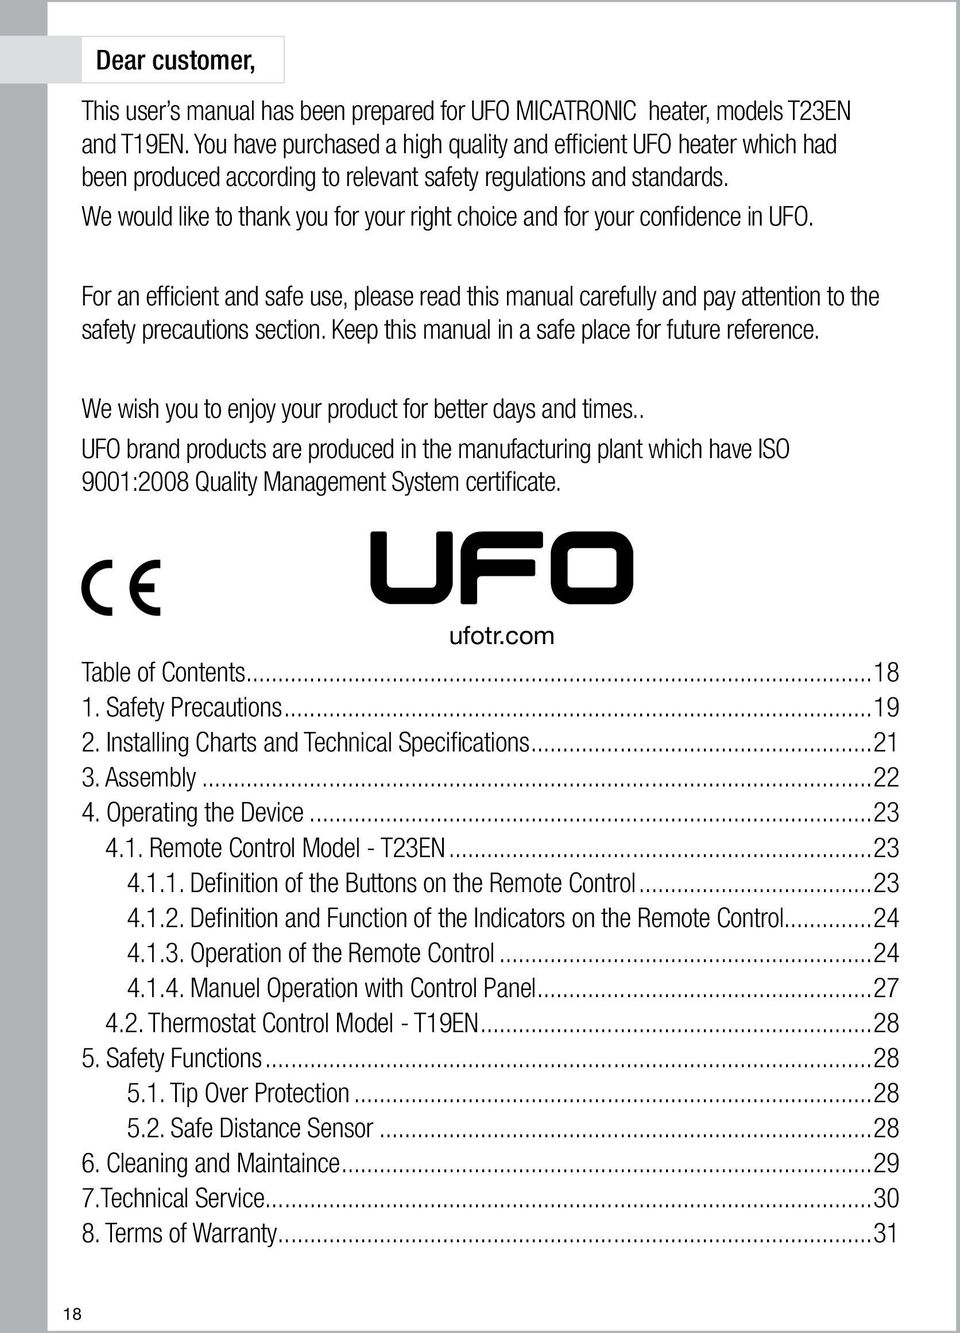 We would like to thank you for your right choice and for your confidence in UFO. For an efficient and safe use, please read this manual carefully and pay attention to the safety precautions section.